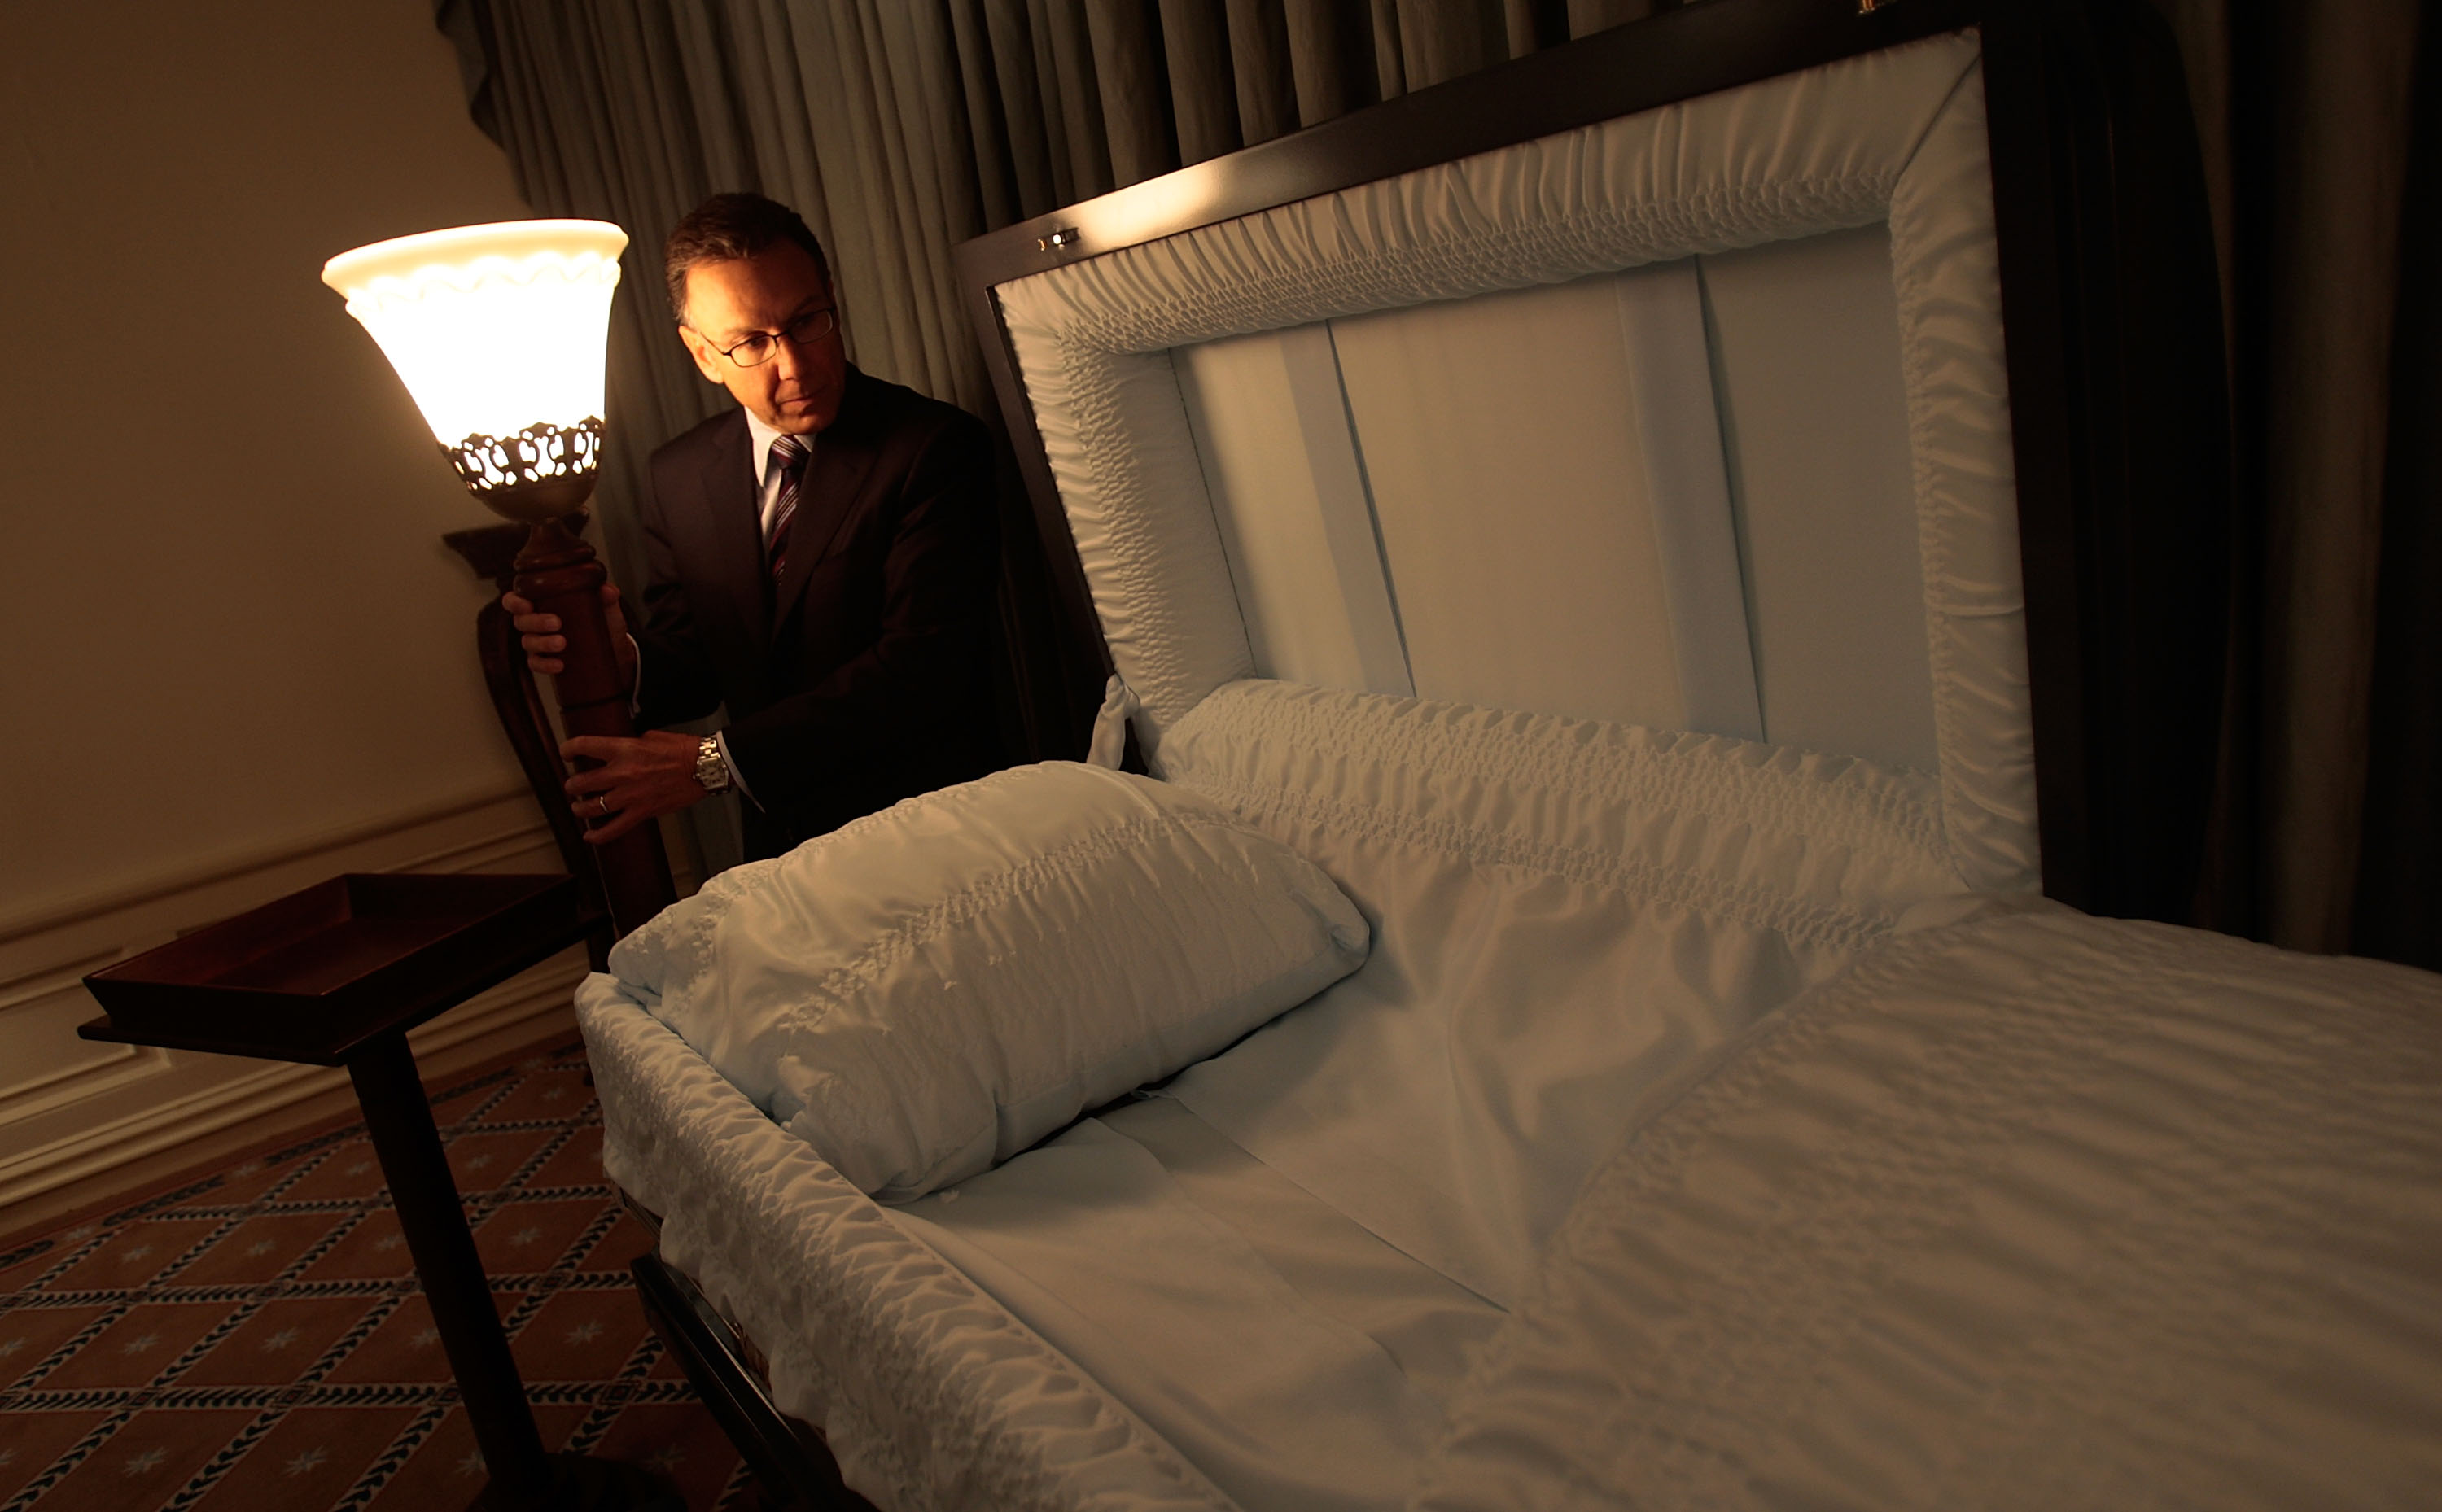 Peter DeLuca looks over a casket in his funeral parlor on November 20, 2008, in New York City. | Source: Getty Images